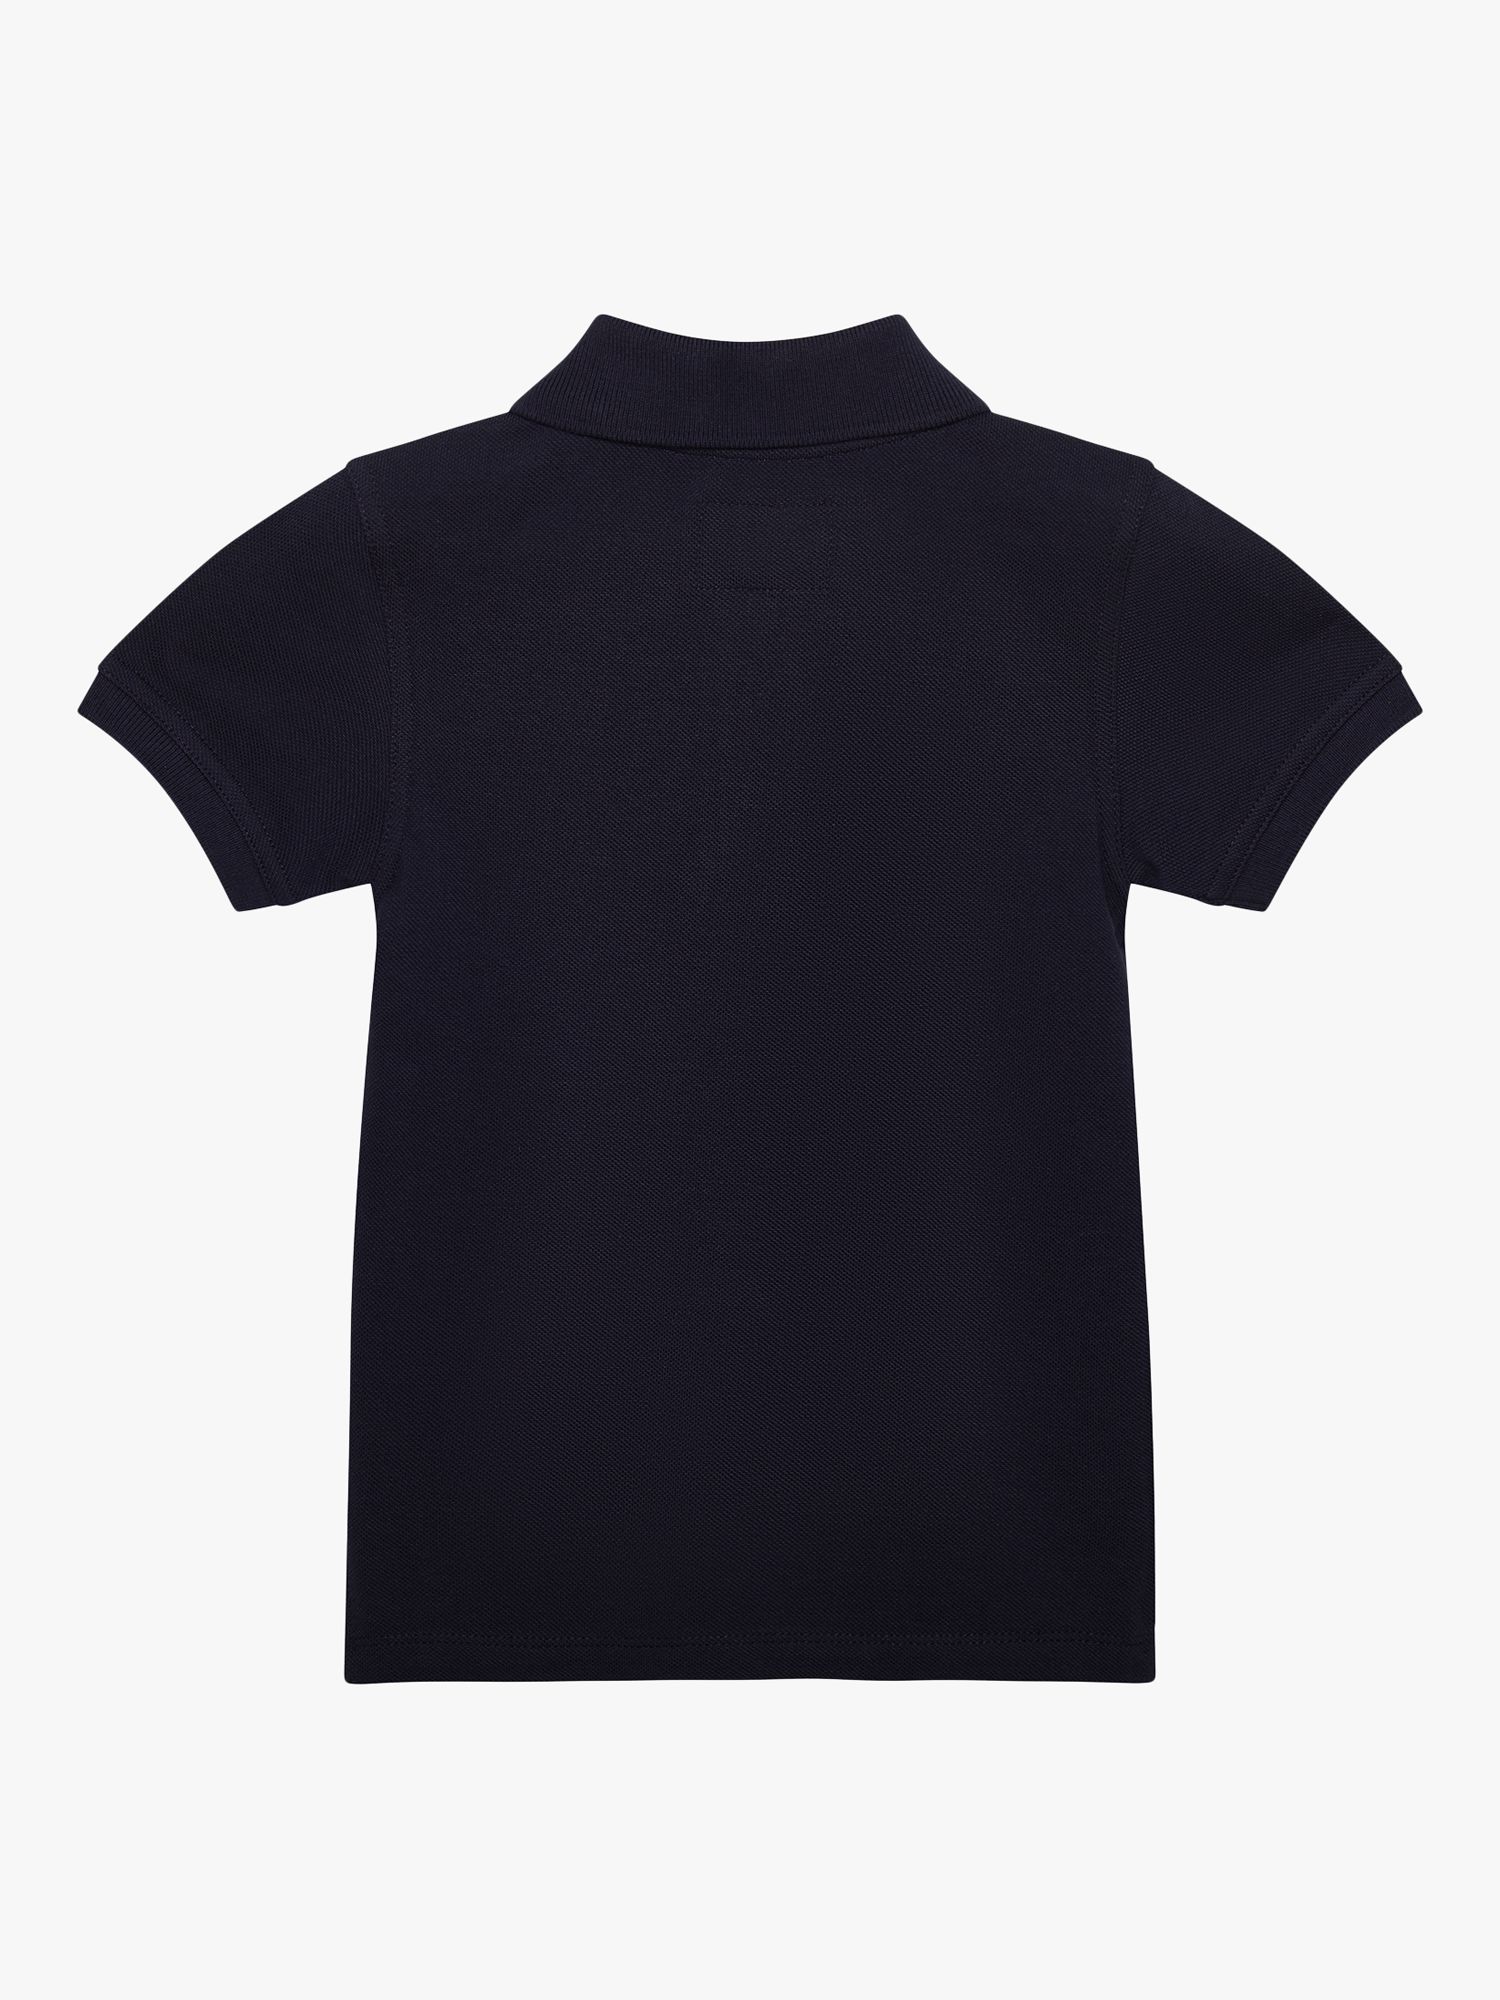 Trotters Kids' Harry Pique Polo Shirt, Navy at John Lewis & Partners